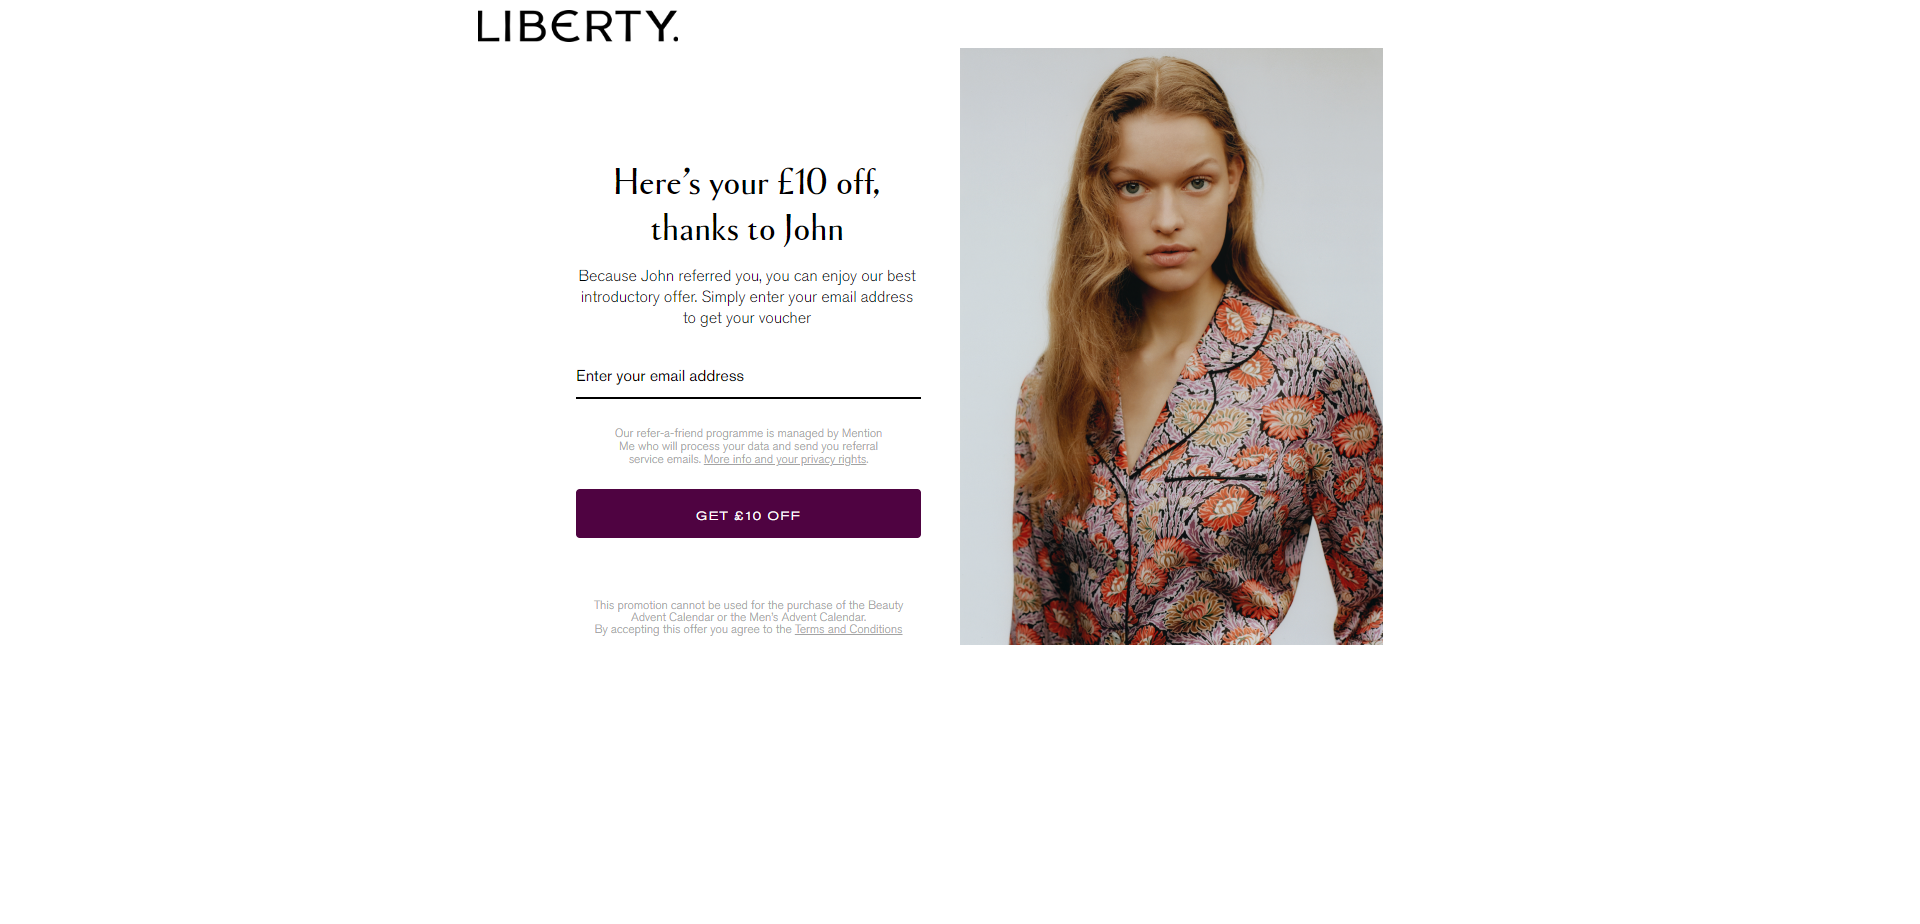 Referral Landing Page for Liberty London